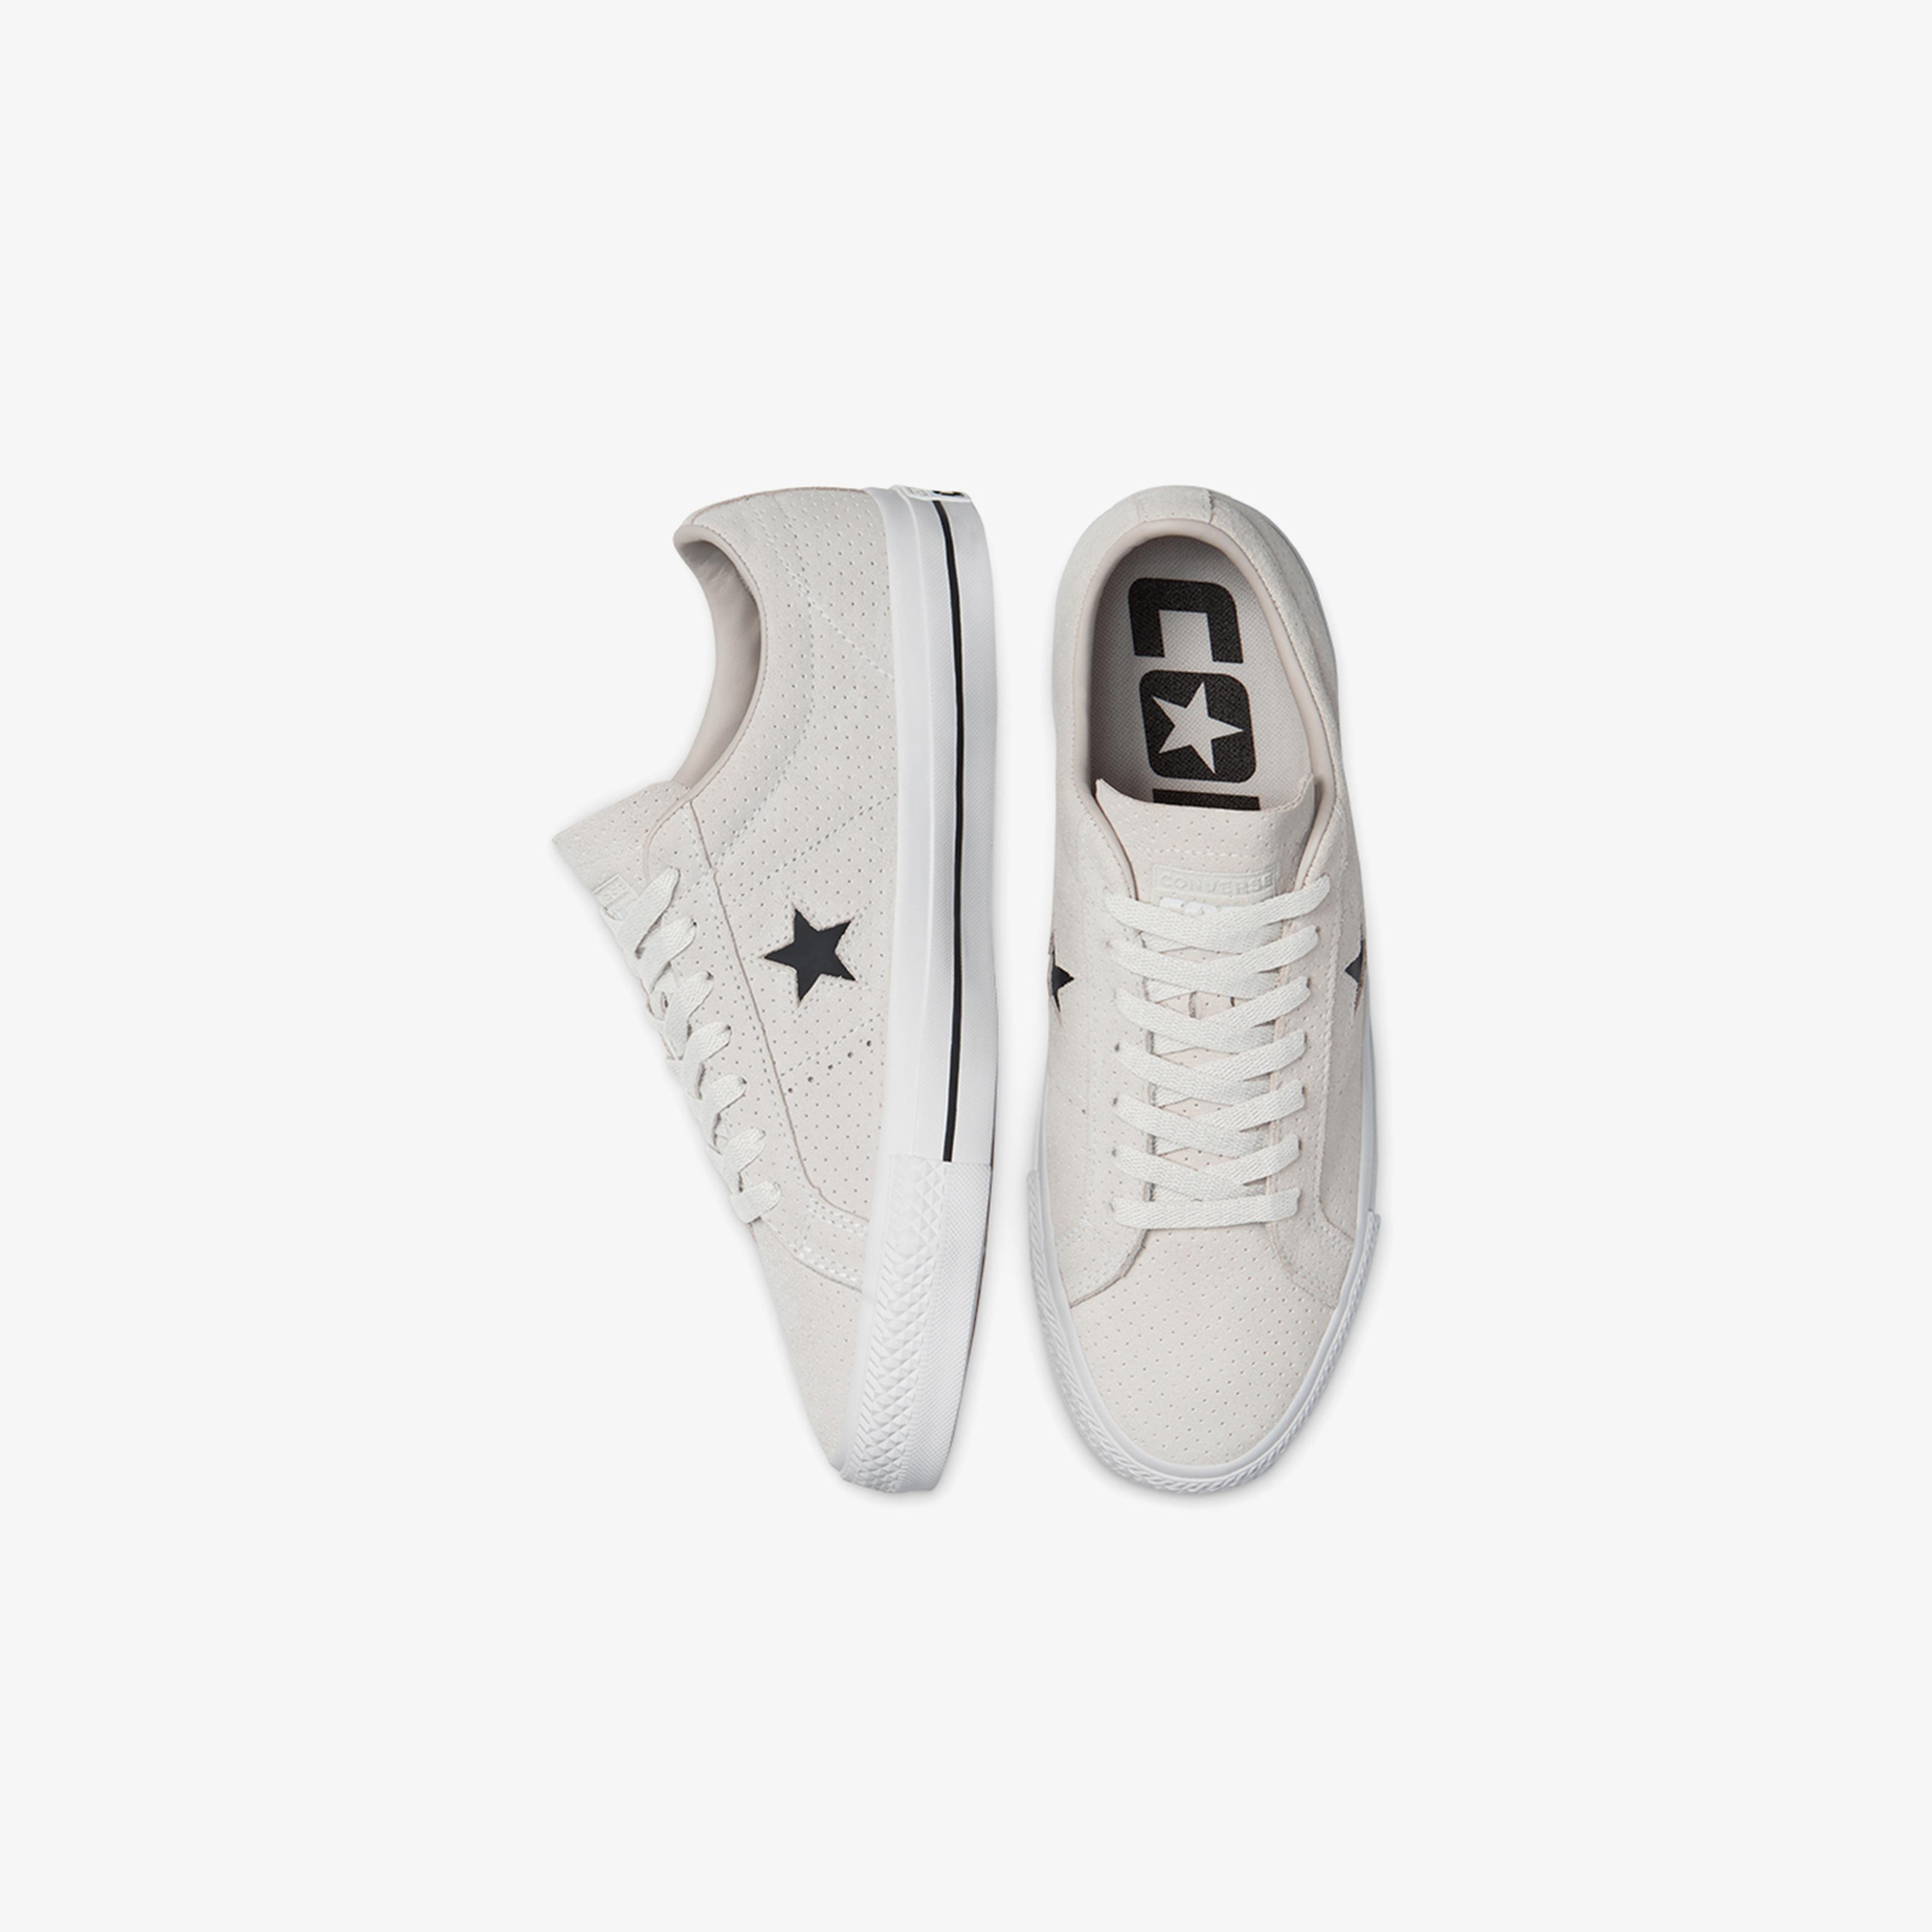 Converse One Star Pro Perf Suede Unisex Gri Sneaker